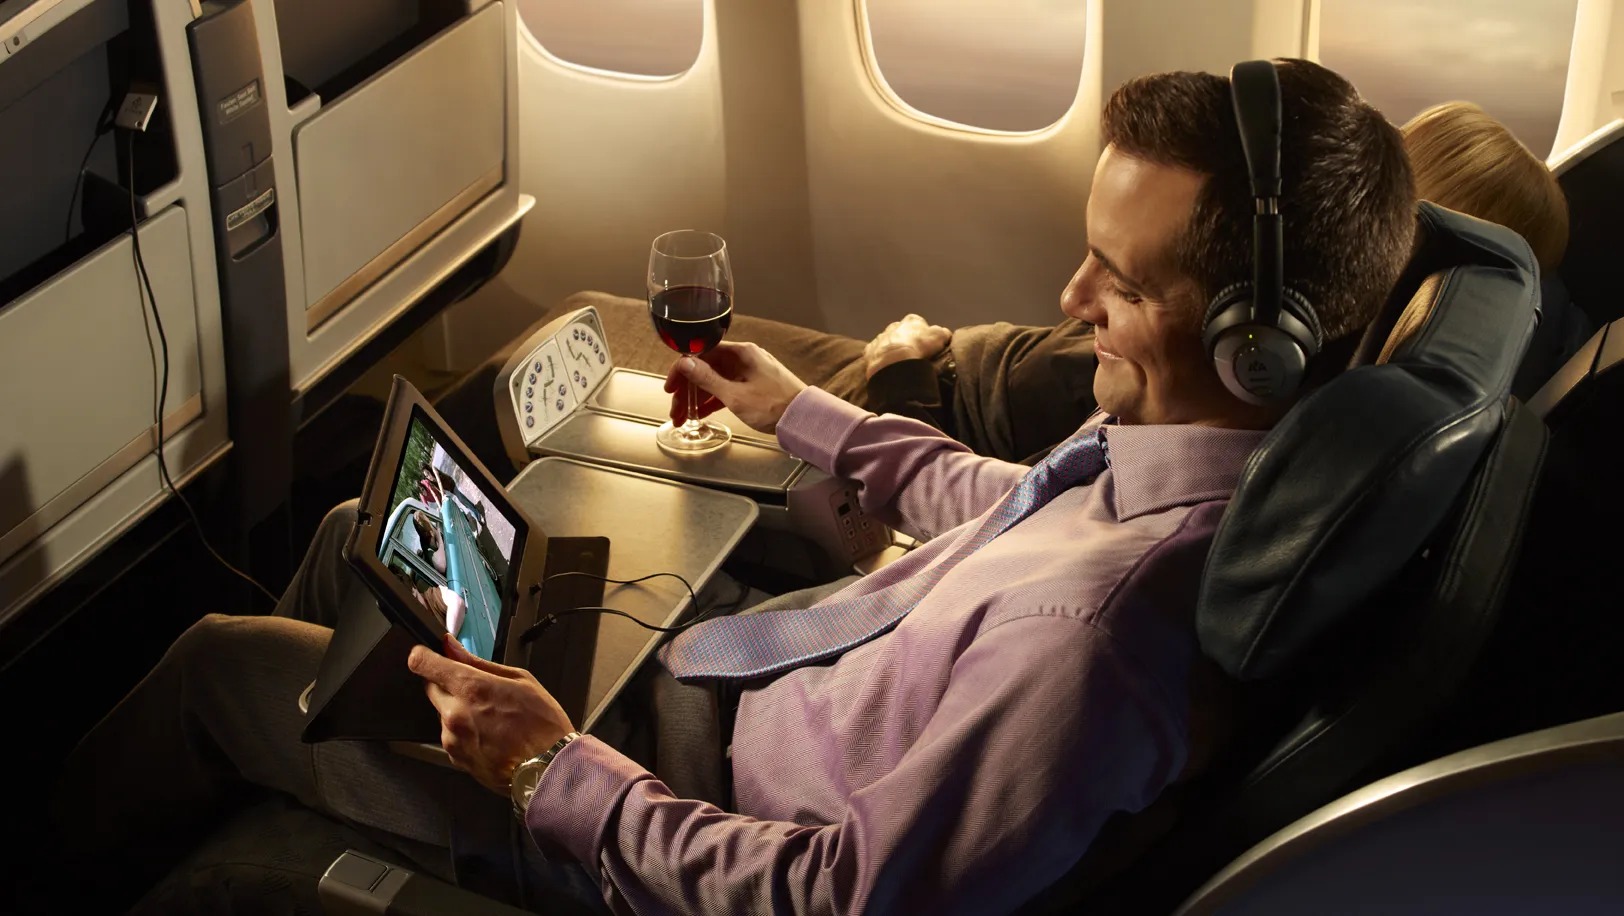 How To Download Movies For The Plane